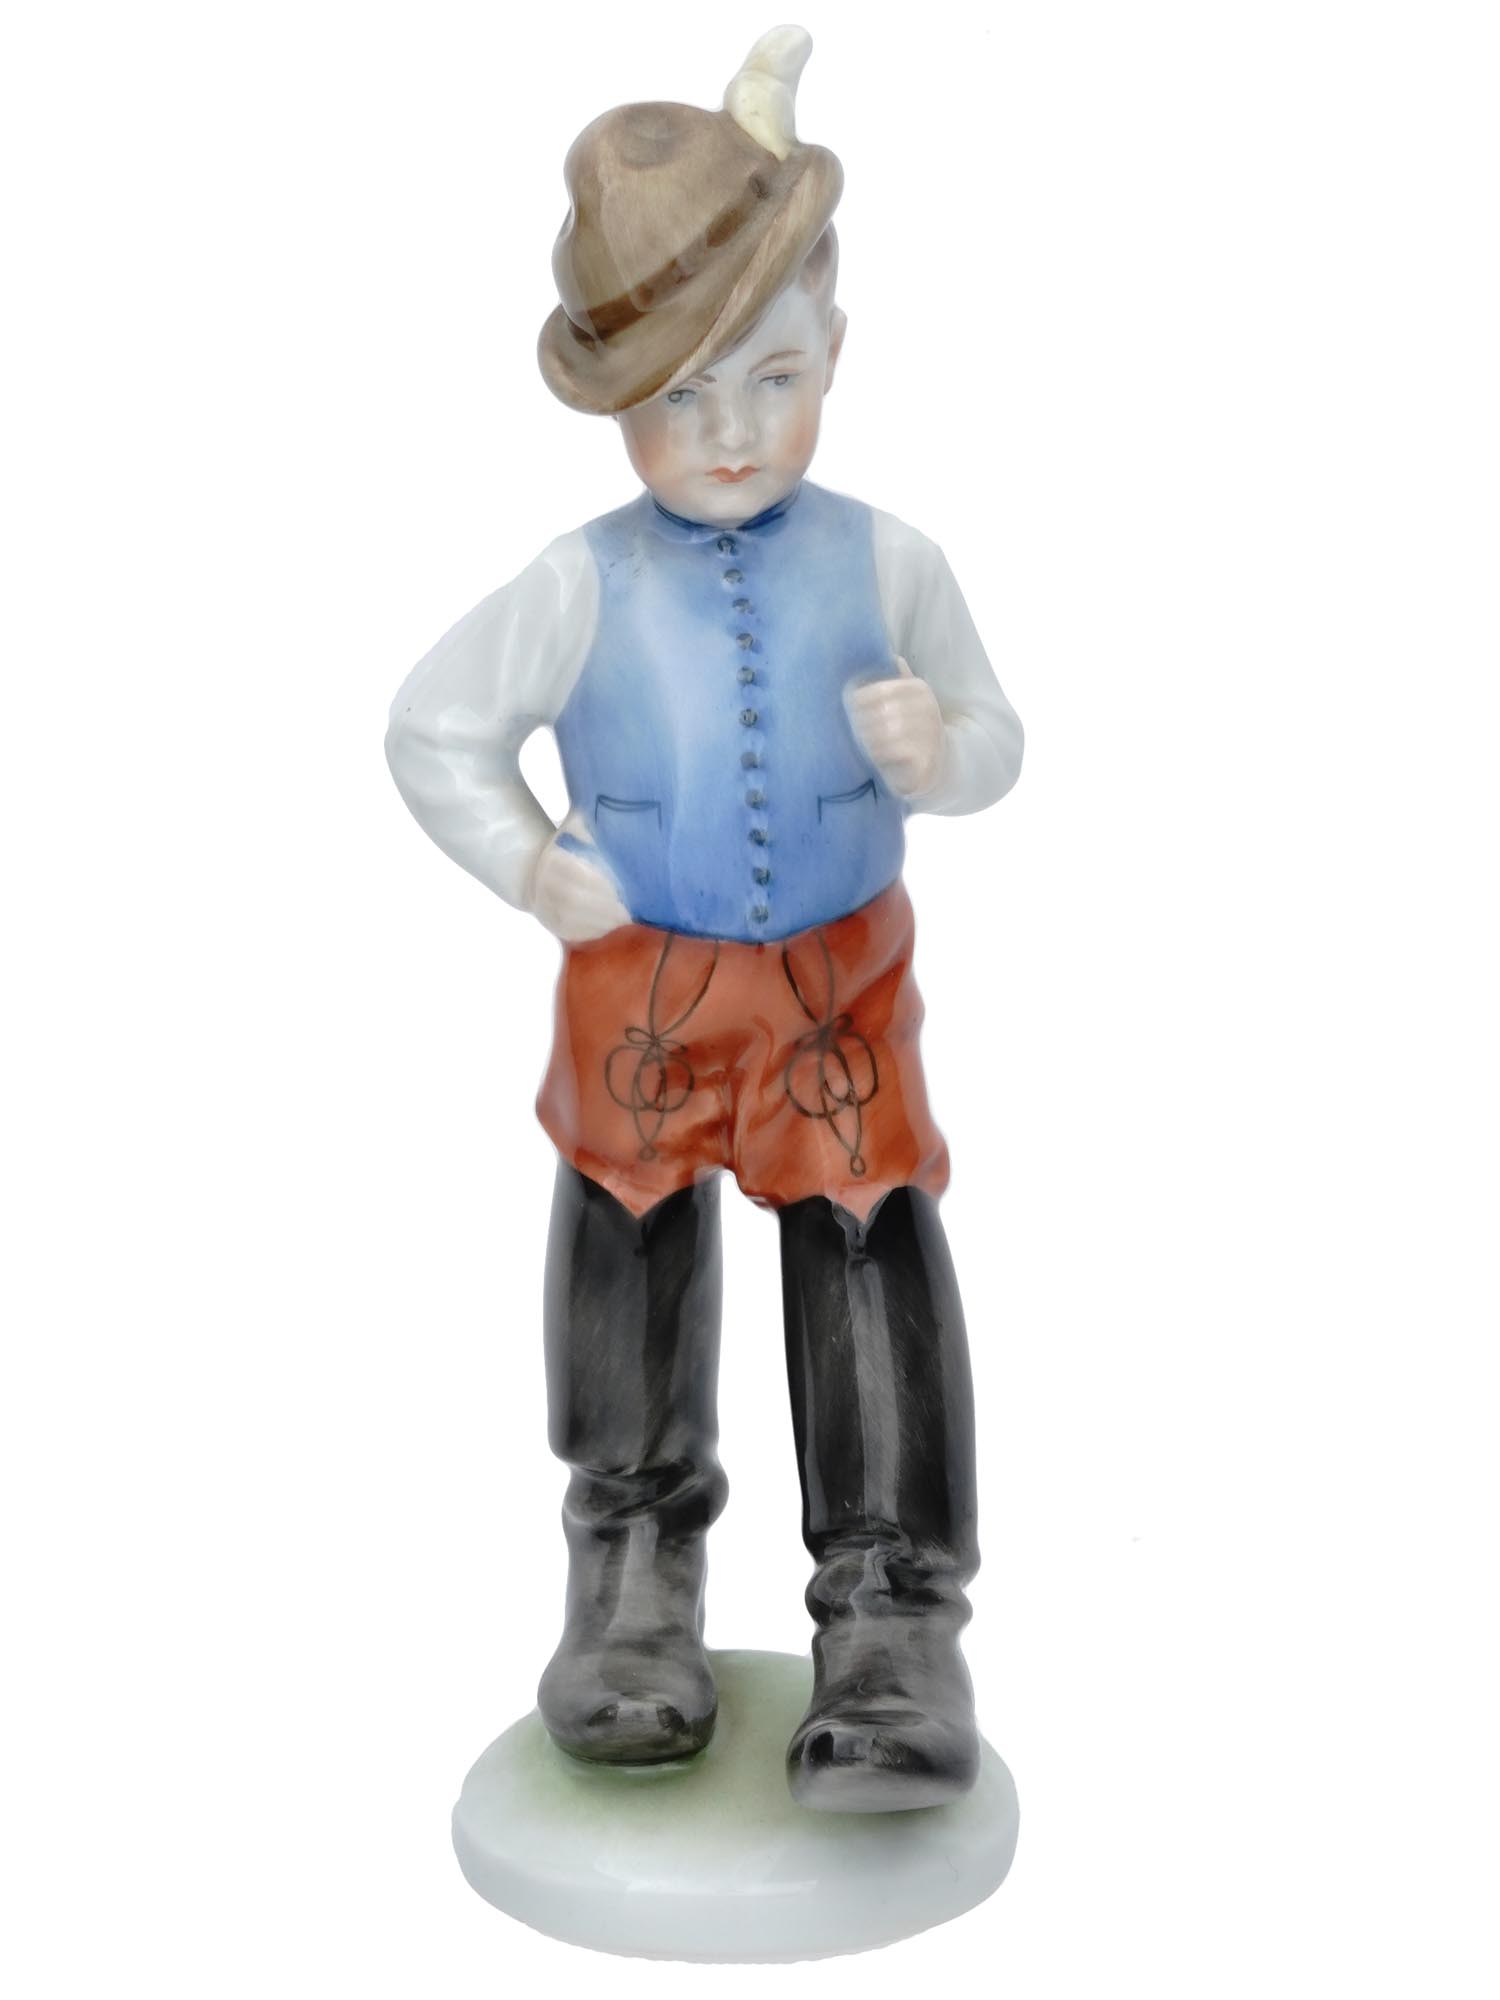 HEREND HUNGARY PORCELAIN FIGURINE BOY IN BOOTS PIC-0